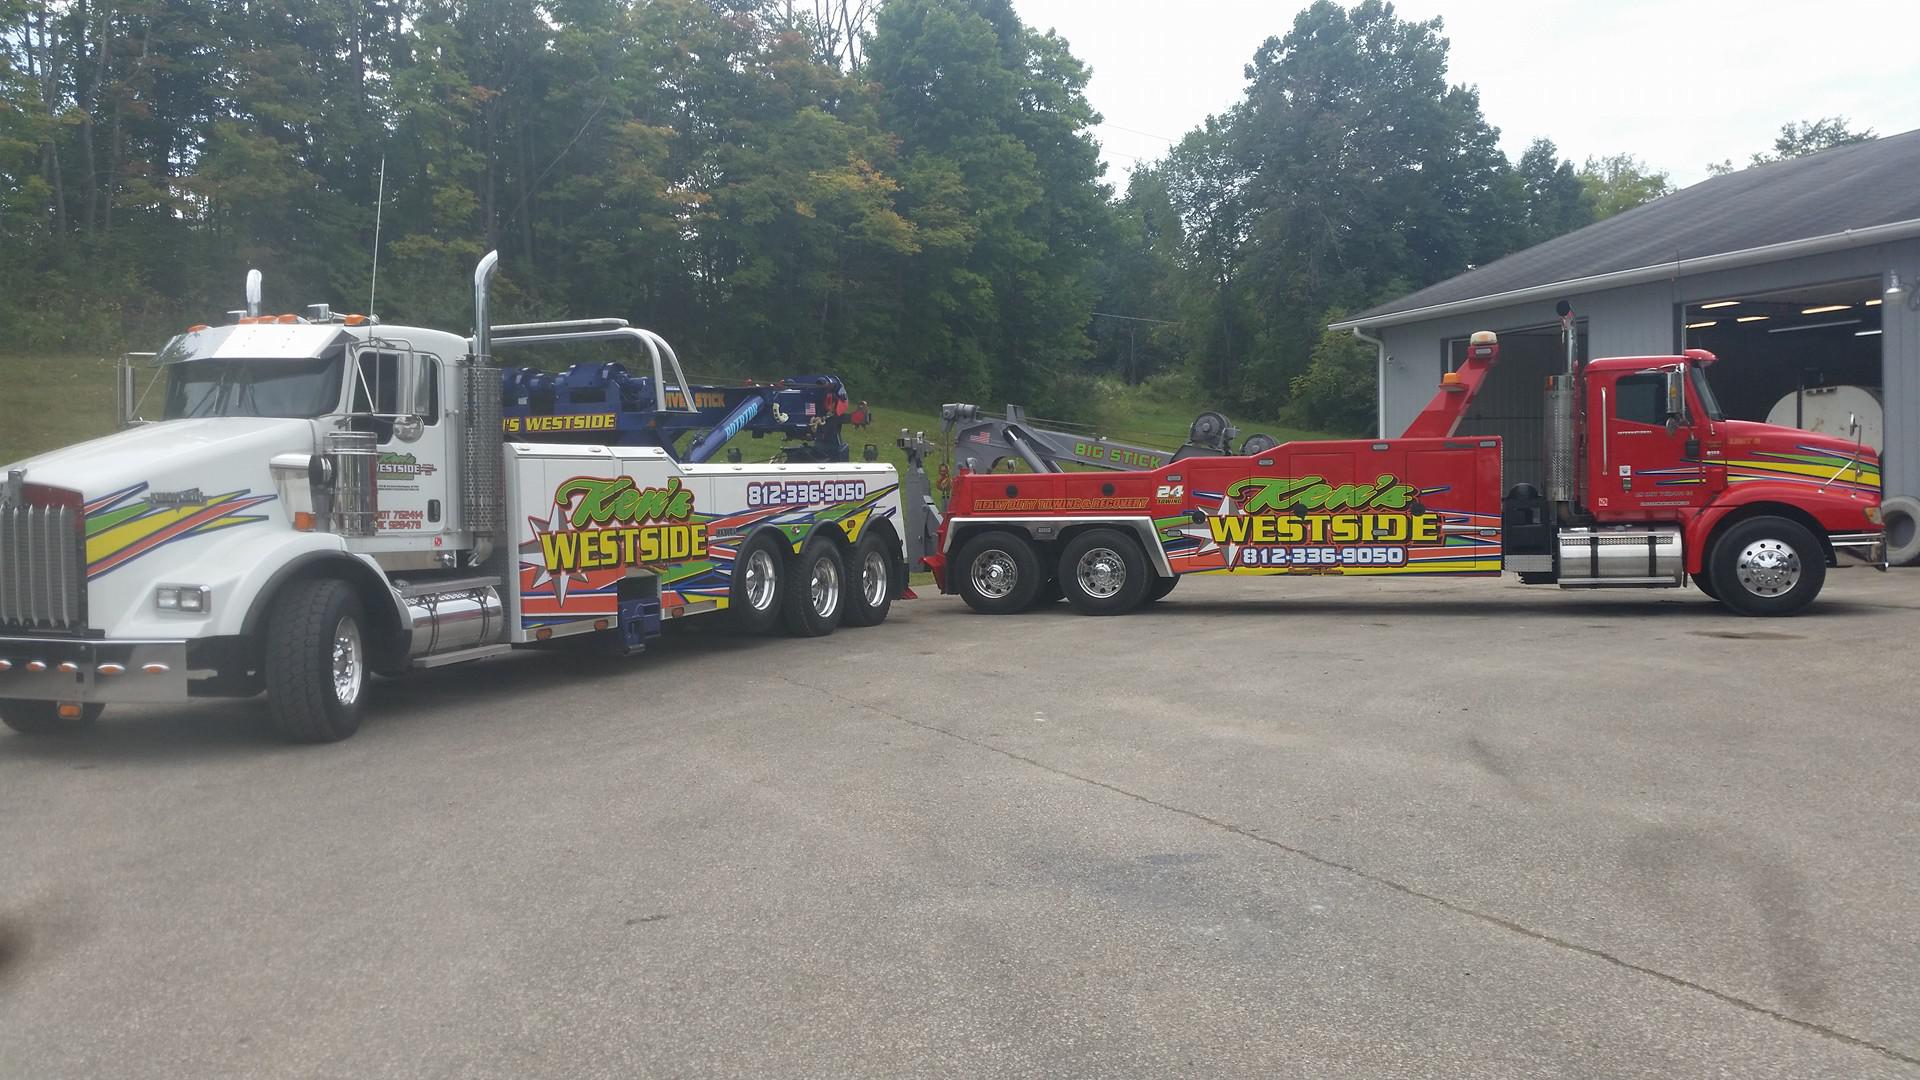 Providing expert car towing and roadside service! Ken's Westside Service & Towing Bloomington (812)336-9050